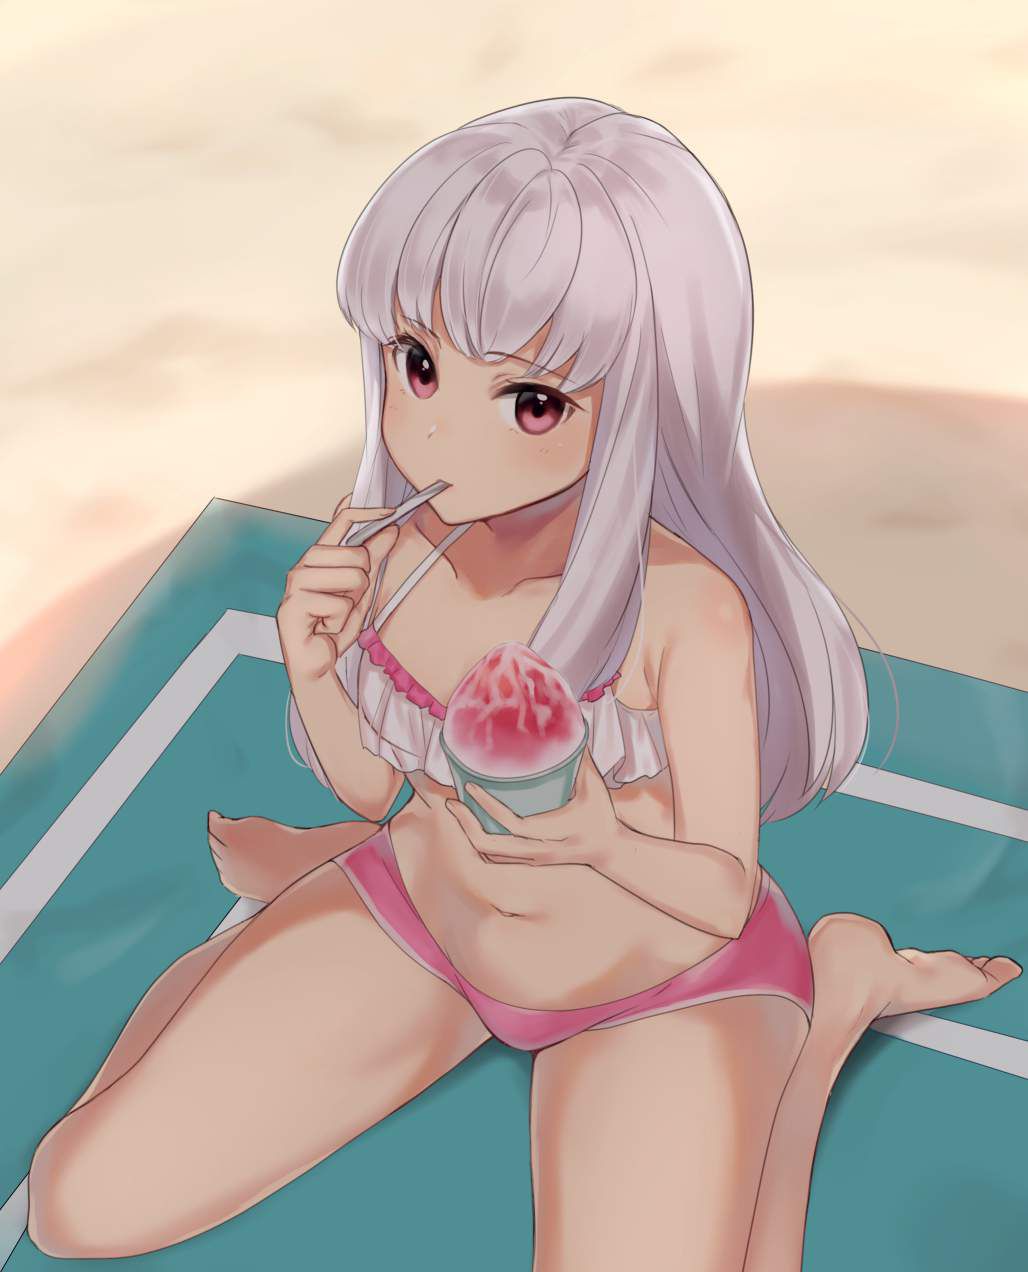 Let's be happy to see the erotic images of Fire Emblem! 10